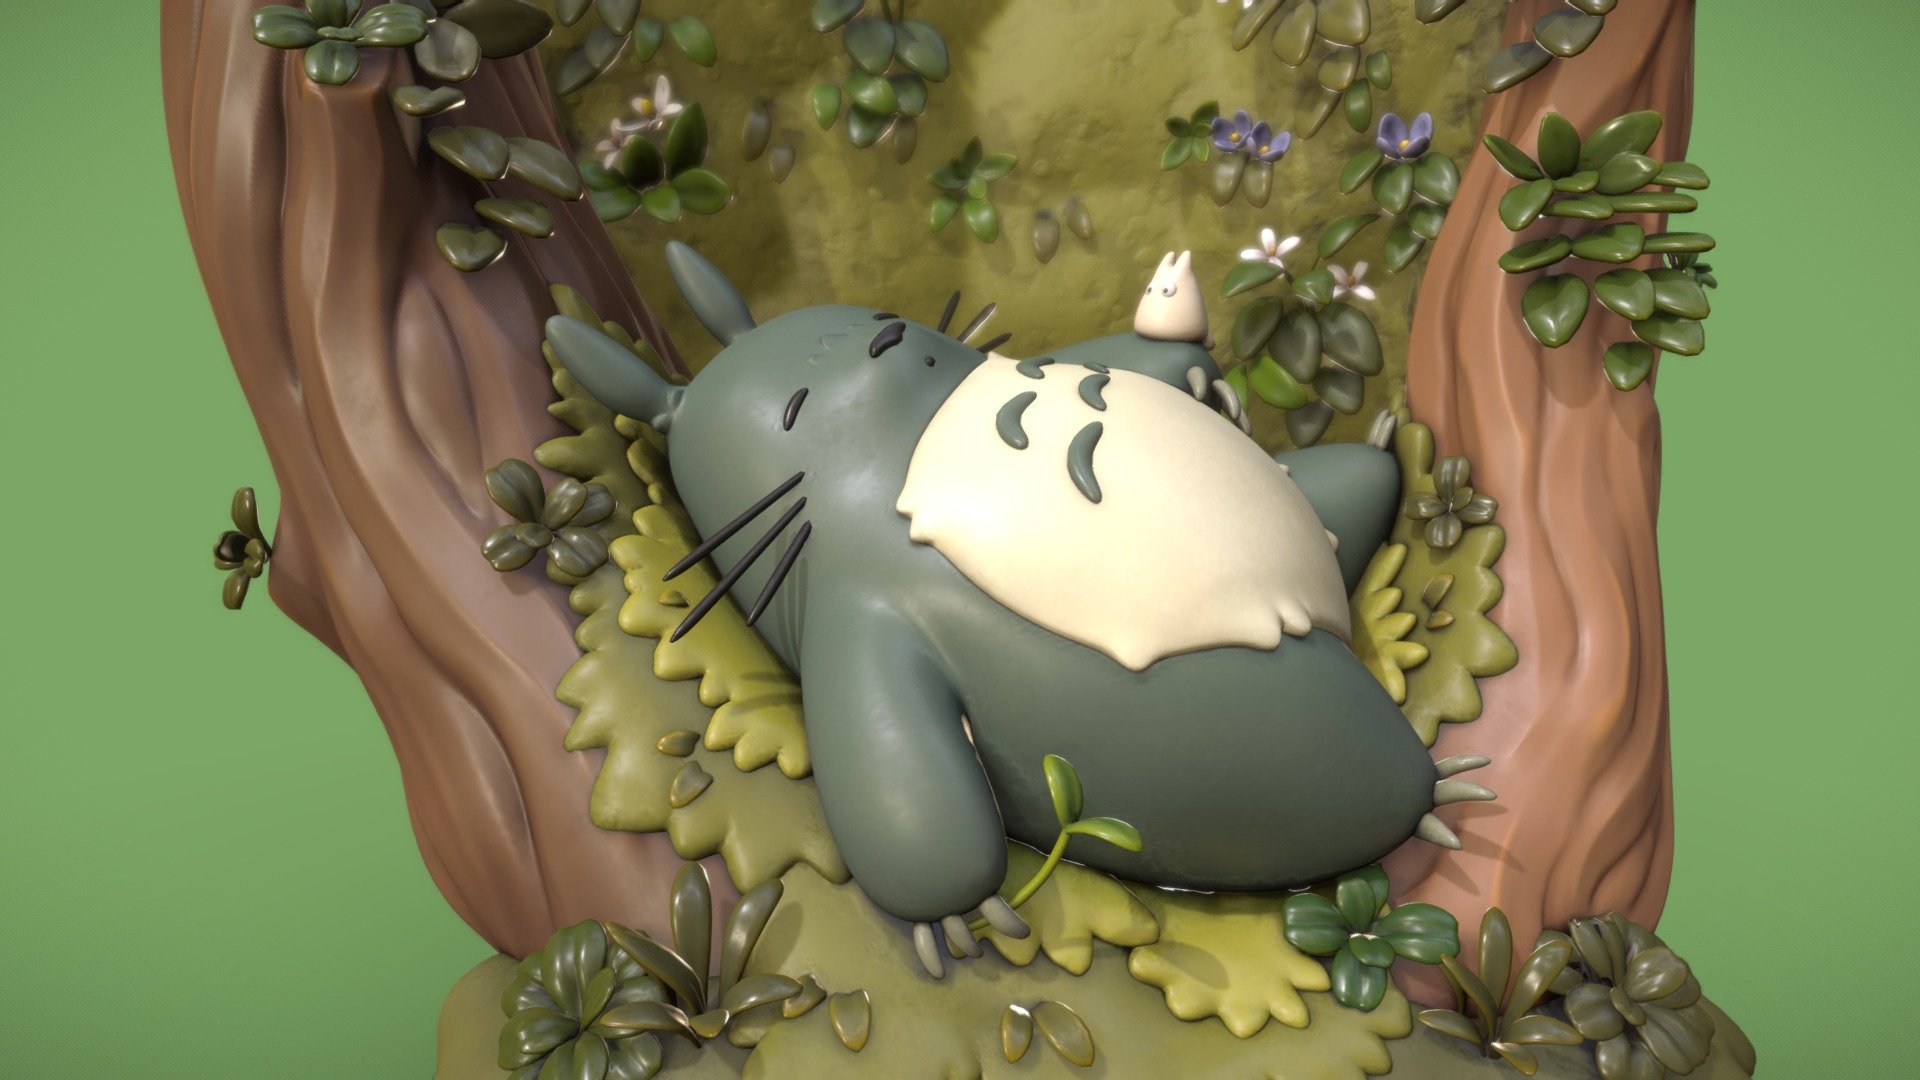 A work in progress model of a sleeping Totoro, from the famous Studio Ghibli animation film My Neighbor Totoro.
Feel free to leave feedback as I will be adjusting this model in the future!

model made in Zbrush and textured in Substance Painter 3d model